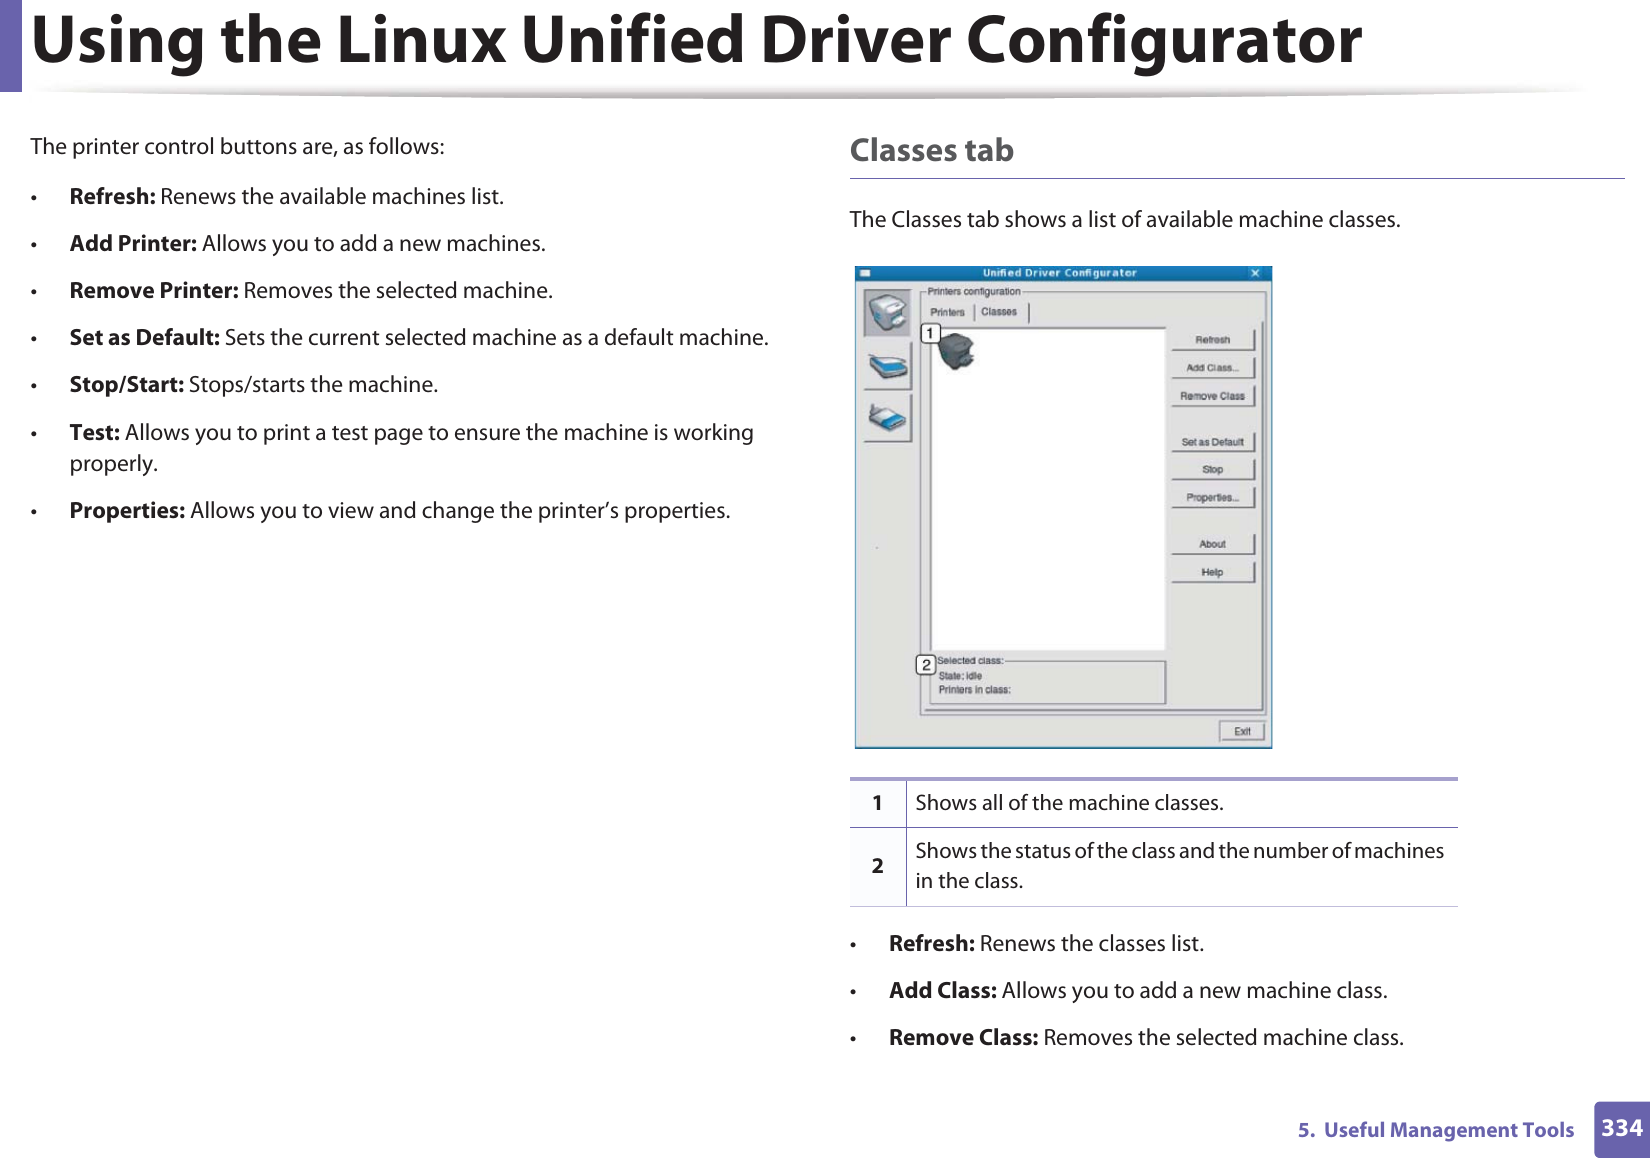 Using the Linux Unified Driver Configurator3345.  Useful Management ToolsThe printer control buttons are, as follows:•Refresh: Renews the available machines list.•Add Printer: Allows you to add a new machines.•Remove Printer: Removes the selected machine.•Set as Default: Sets the current selected machine as a default machine.•Stop/Start: Stops/starts the machine.•Test: Allows you to print a test page to ensure the machine is working properly.•Properties: Allows you to view and change the printer’s properties. Classes tabThe Classes tab shows a list of available machine classes.•Refresh: Renews the classes list.•Add Class: Allows you to add a new machine class.•Remove Class: Removes the selected machine class.1Shows all of the machine classes.2Shows the status of the class and the number of machines in the class.